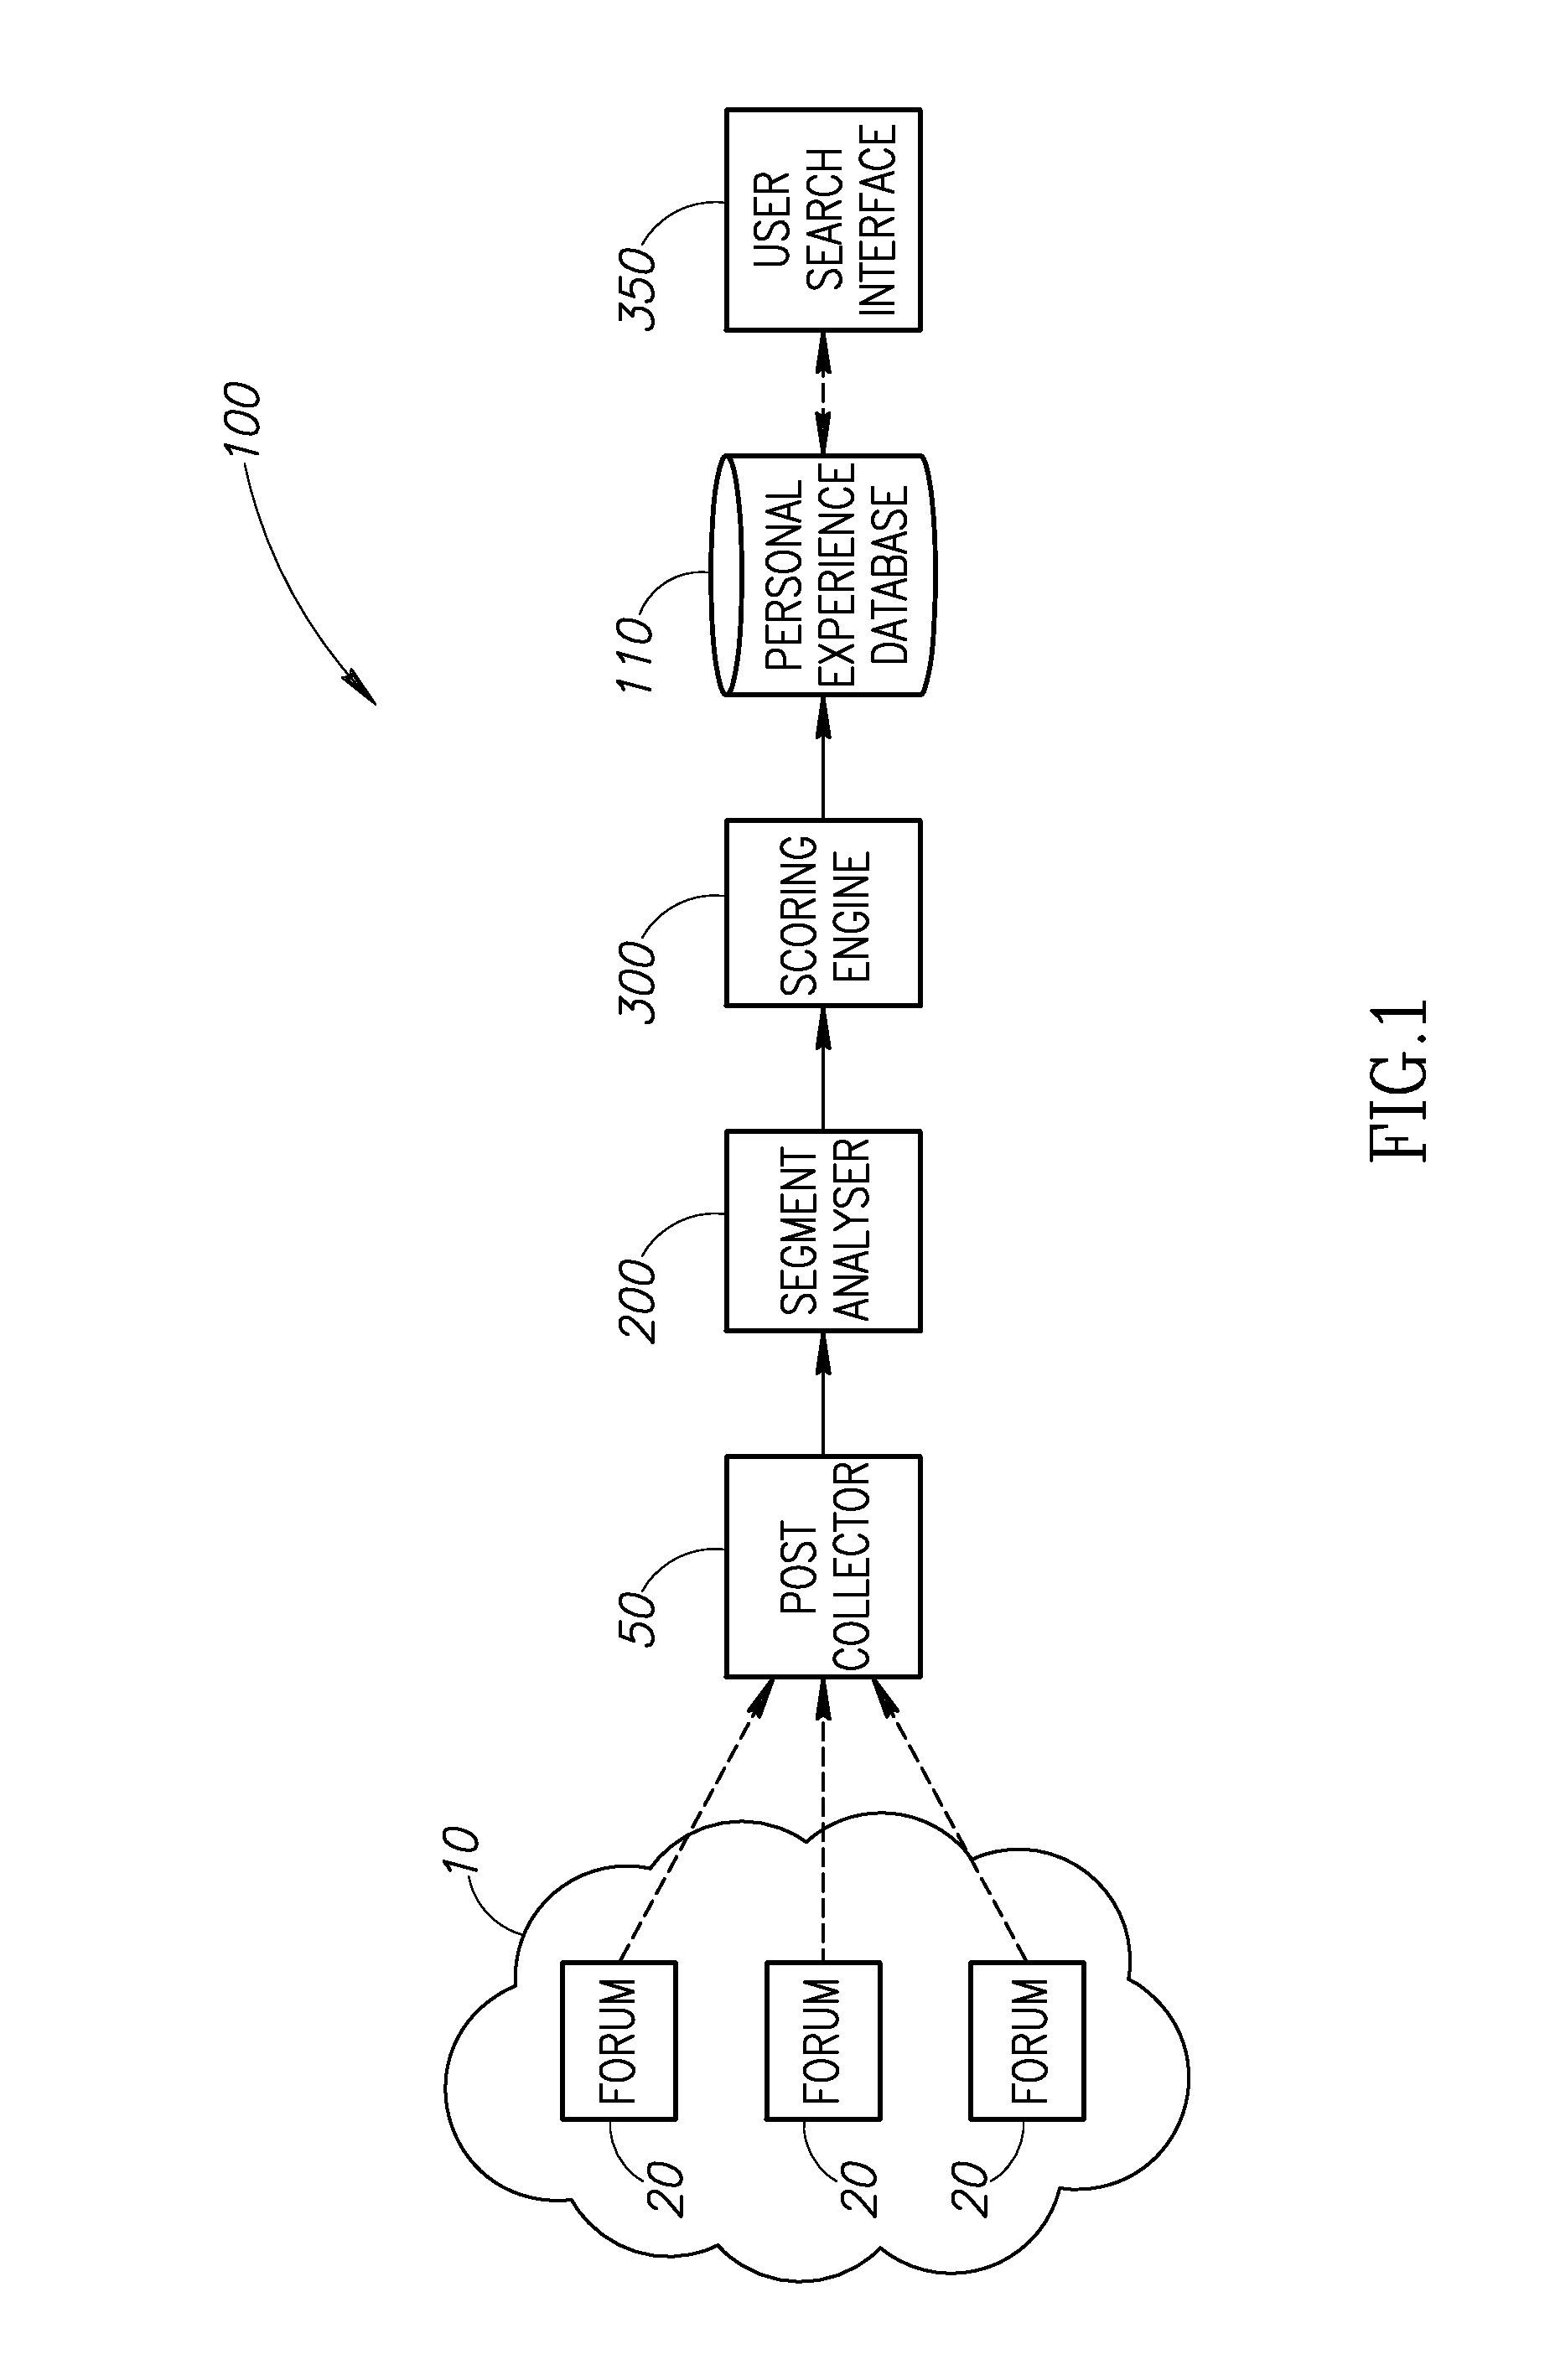 System and method for detecting personal experience event reports from user generated internet content